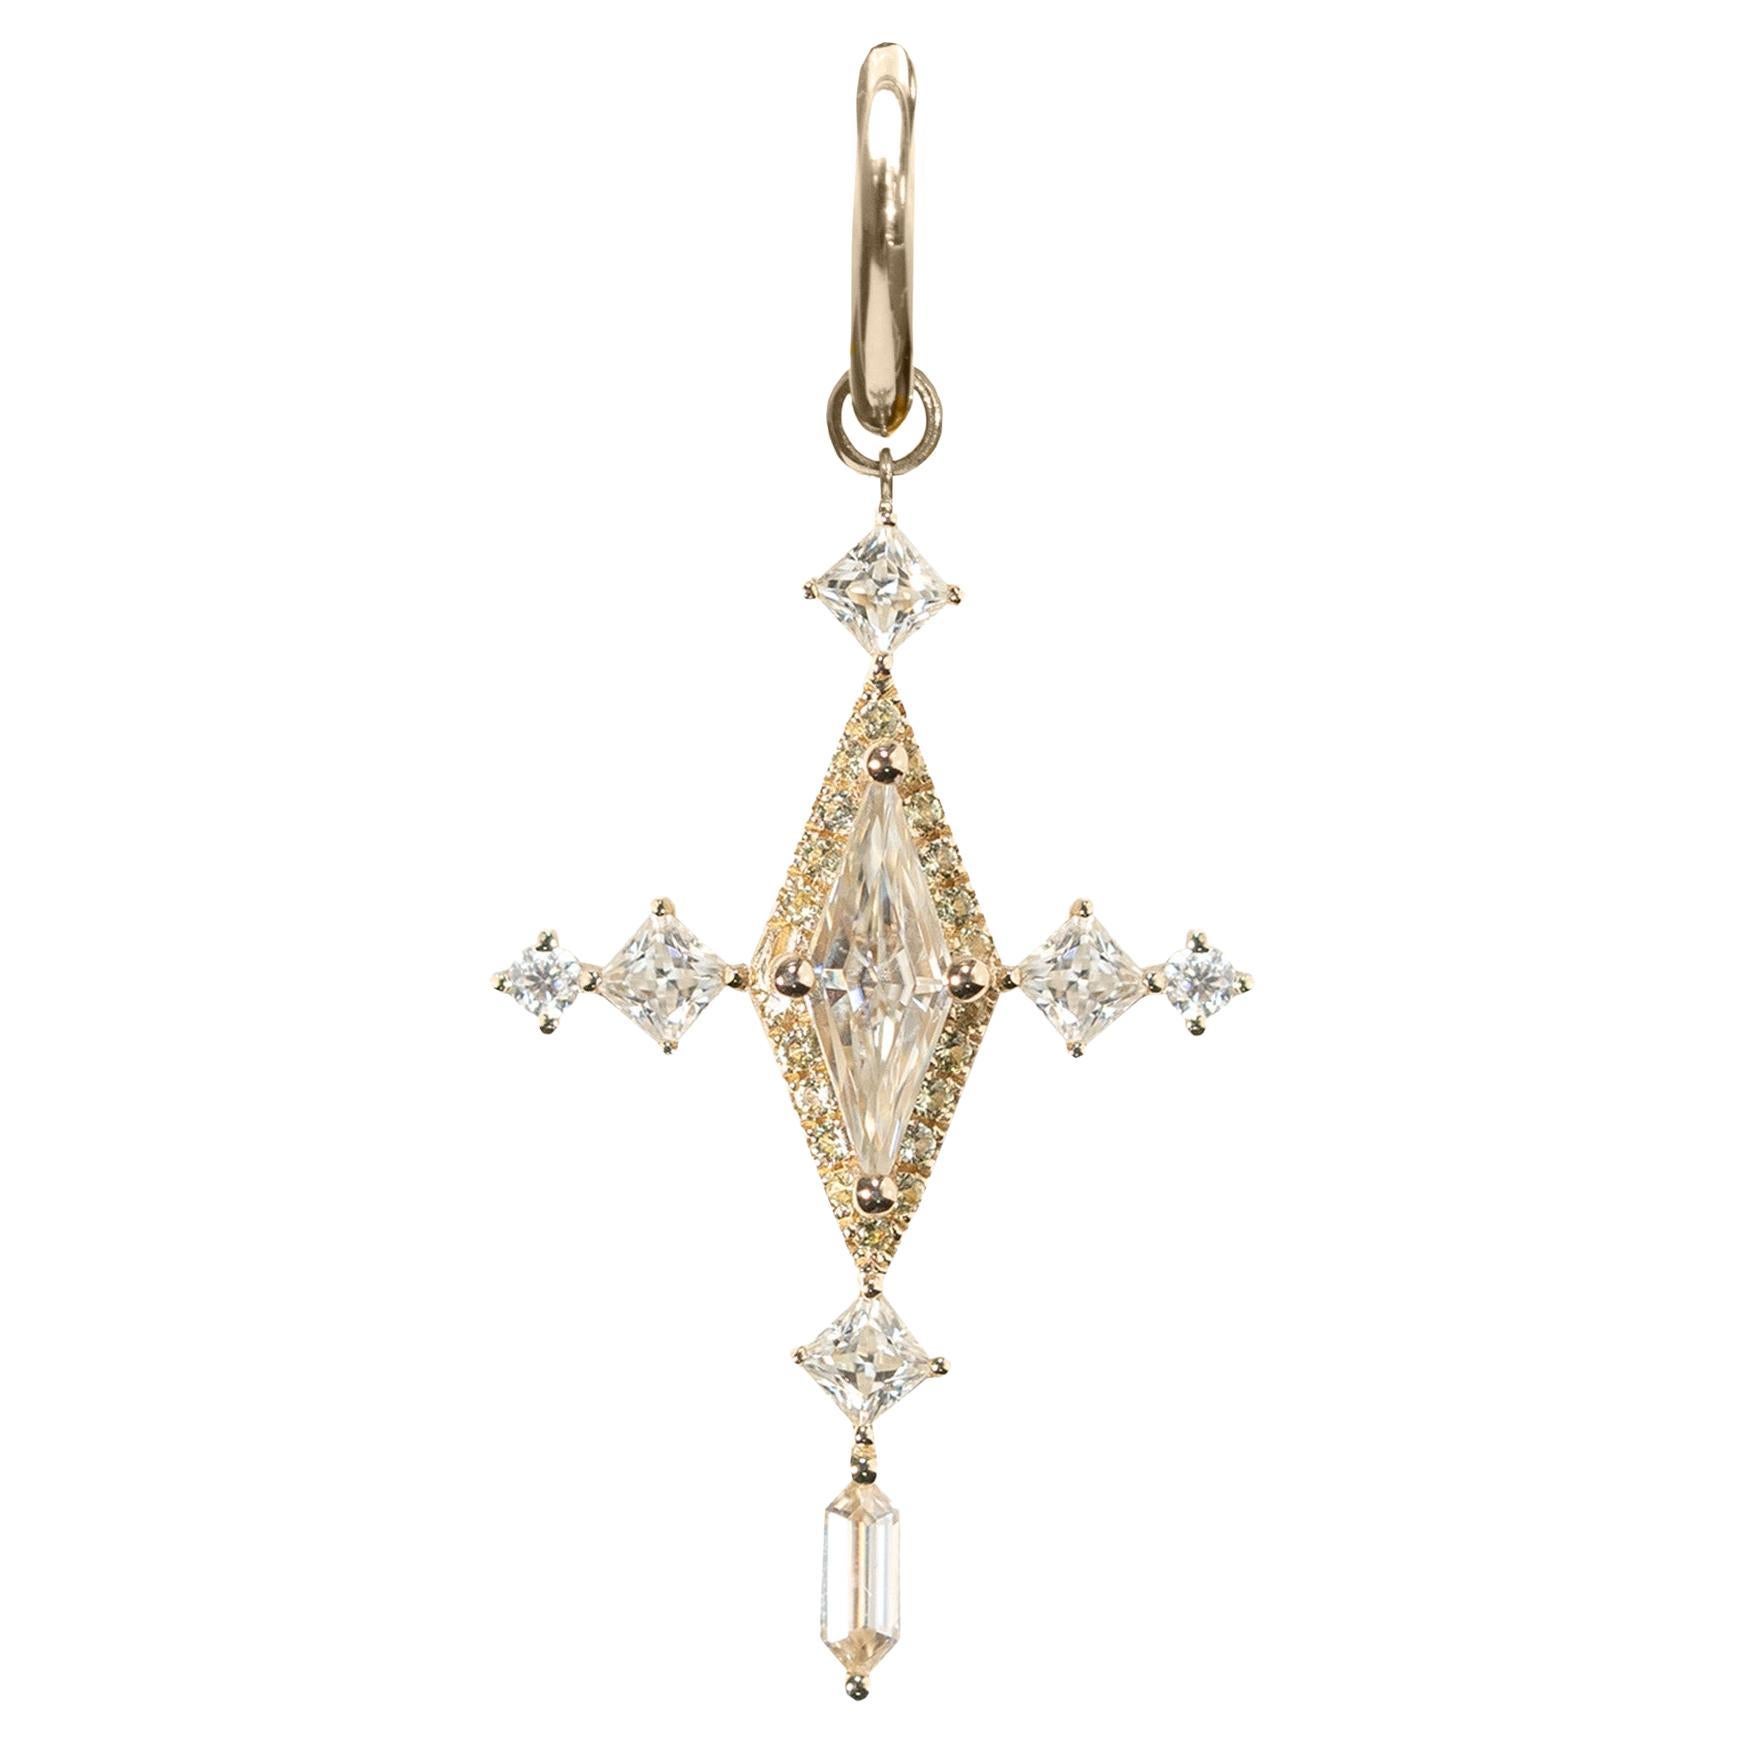 The Champagne Cross- 10kt Yellow Gold Drop Hoop Earring and Pendant For Sale